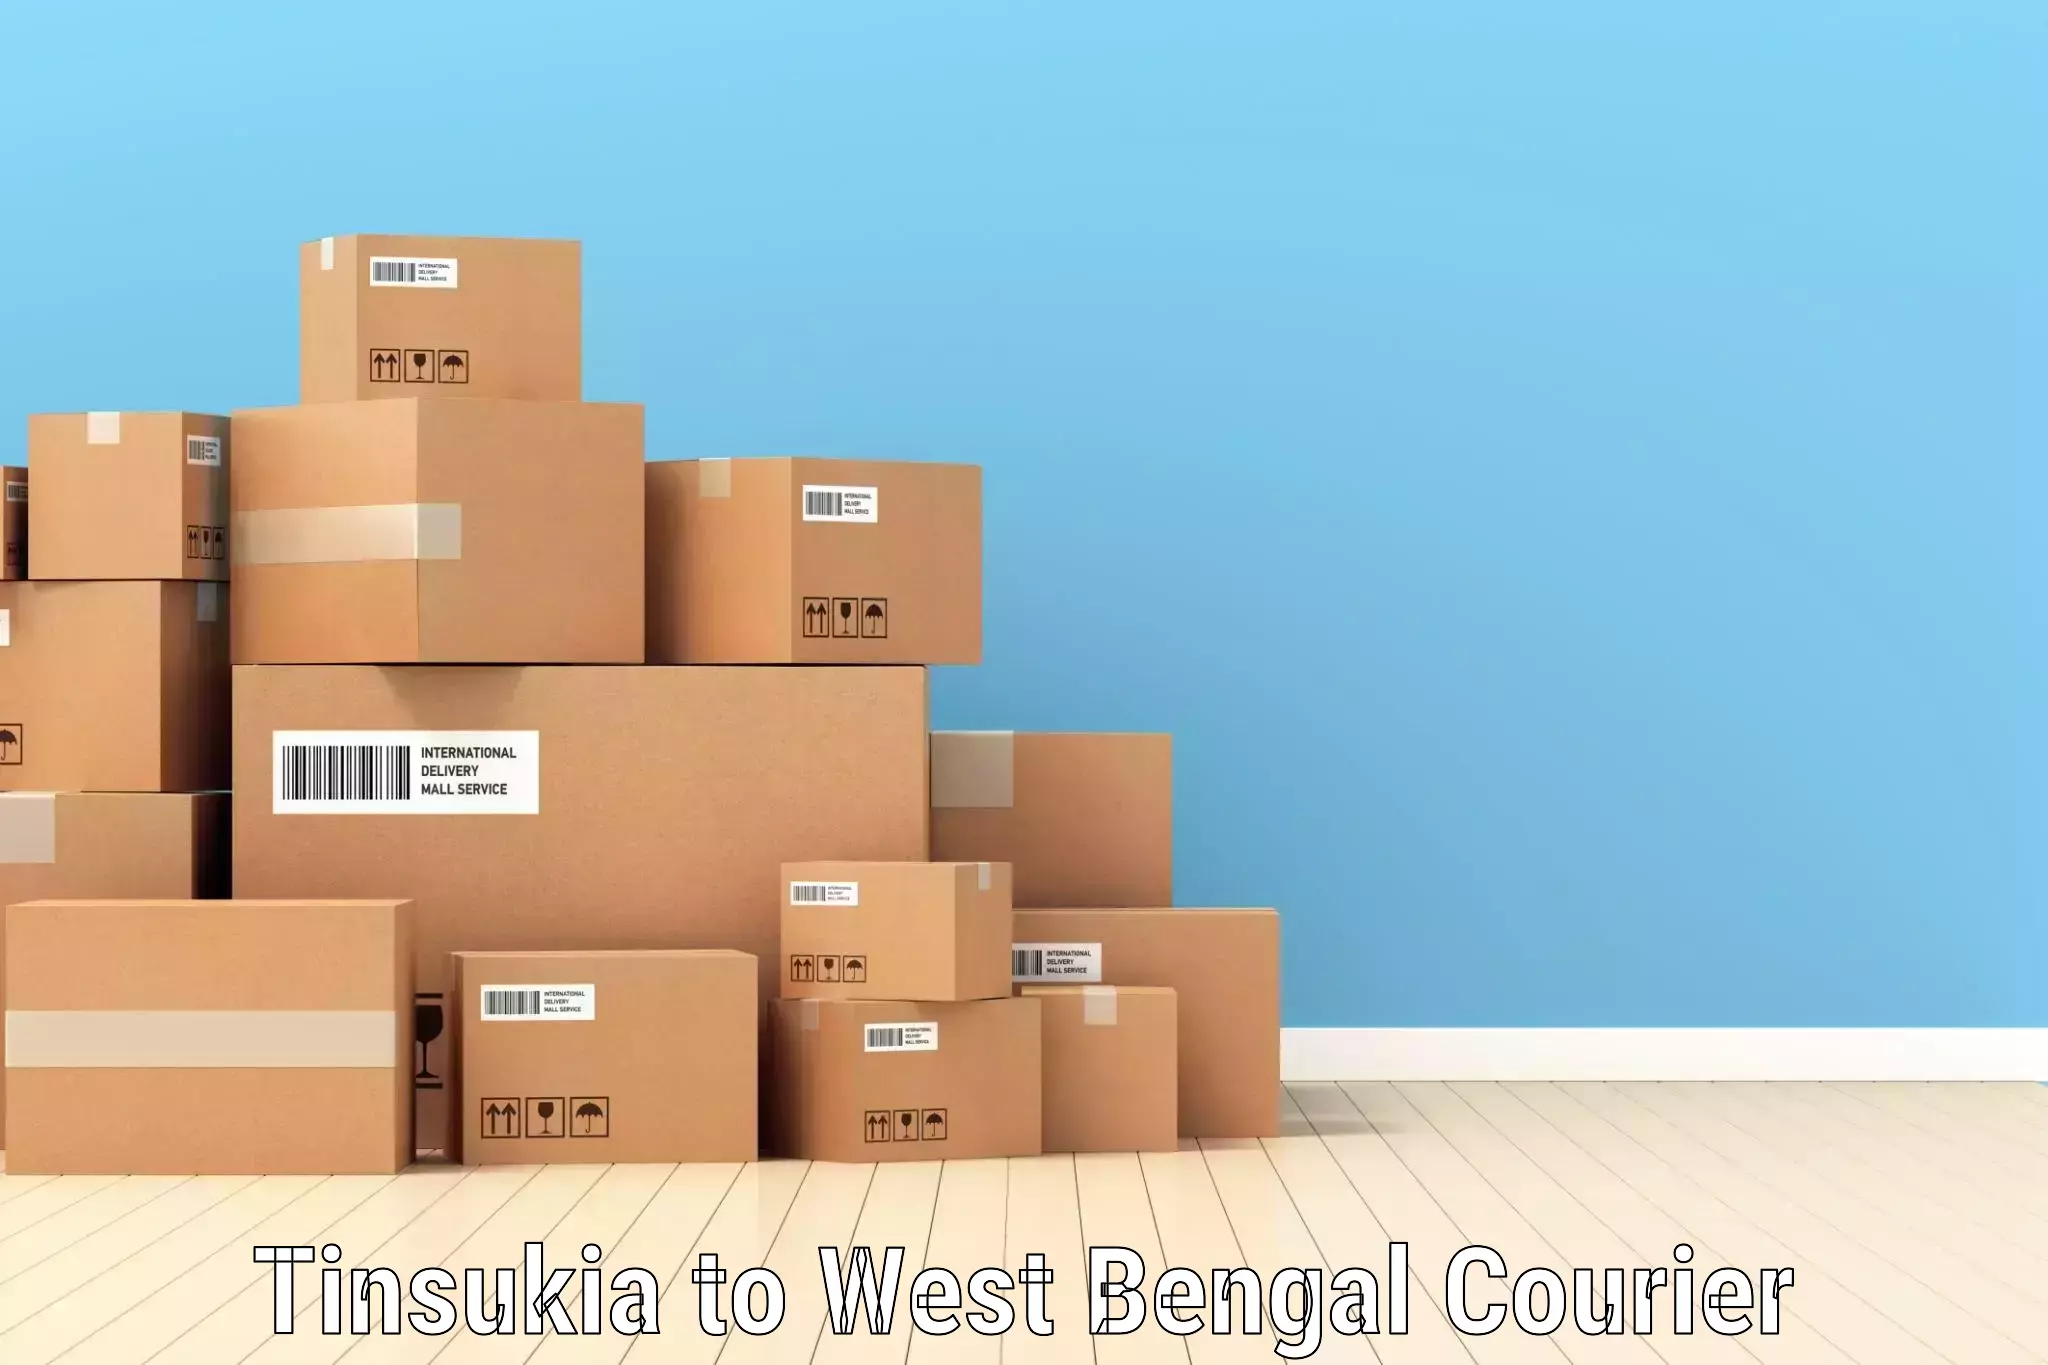 Package delivery network Tinsukia to Midnapore